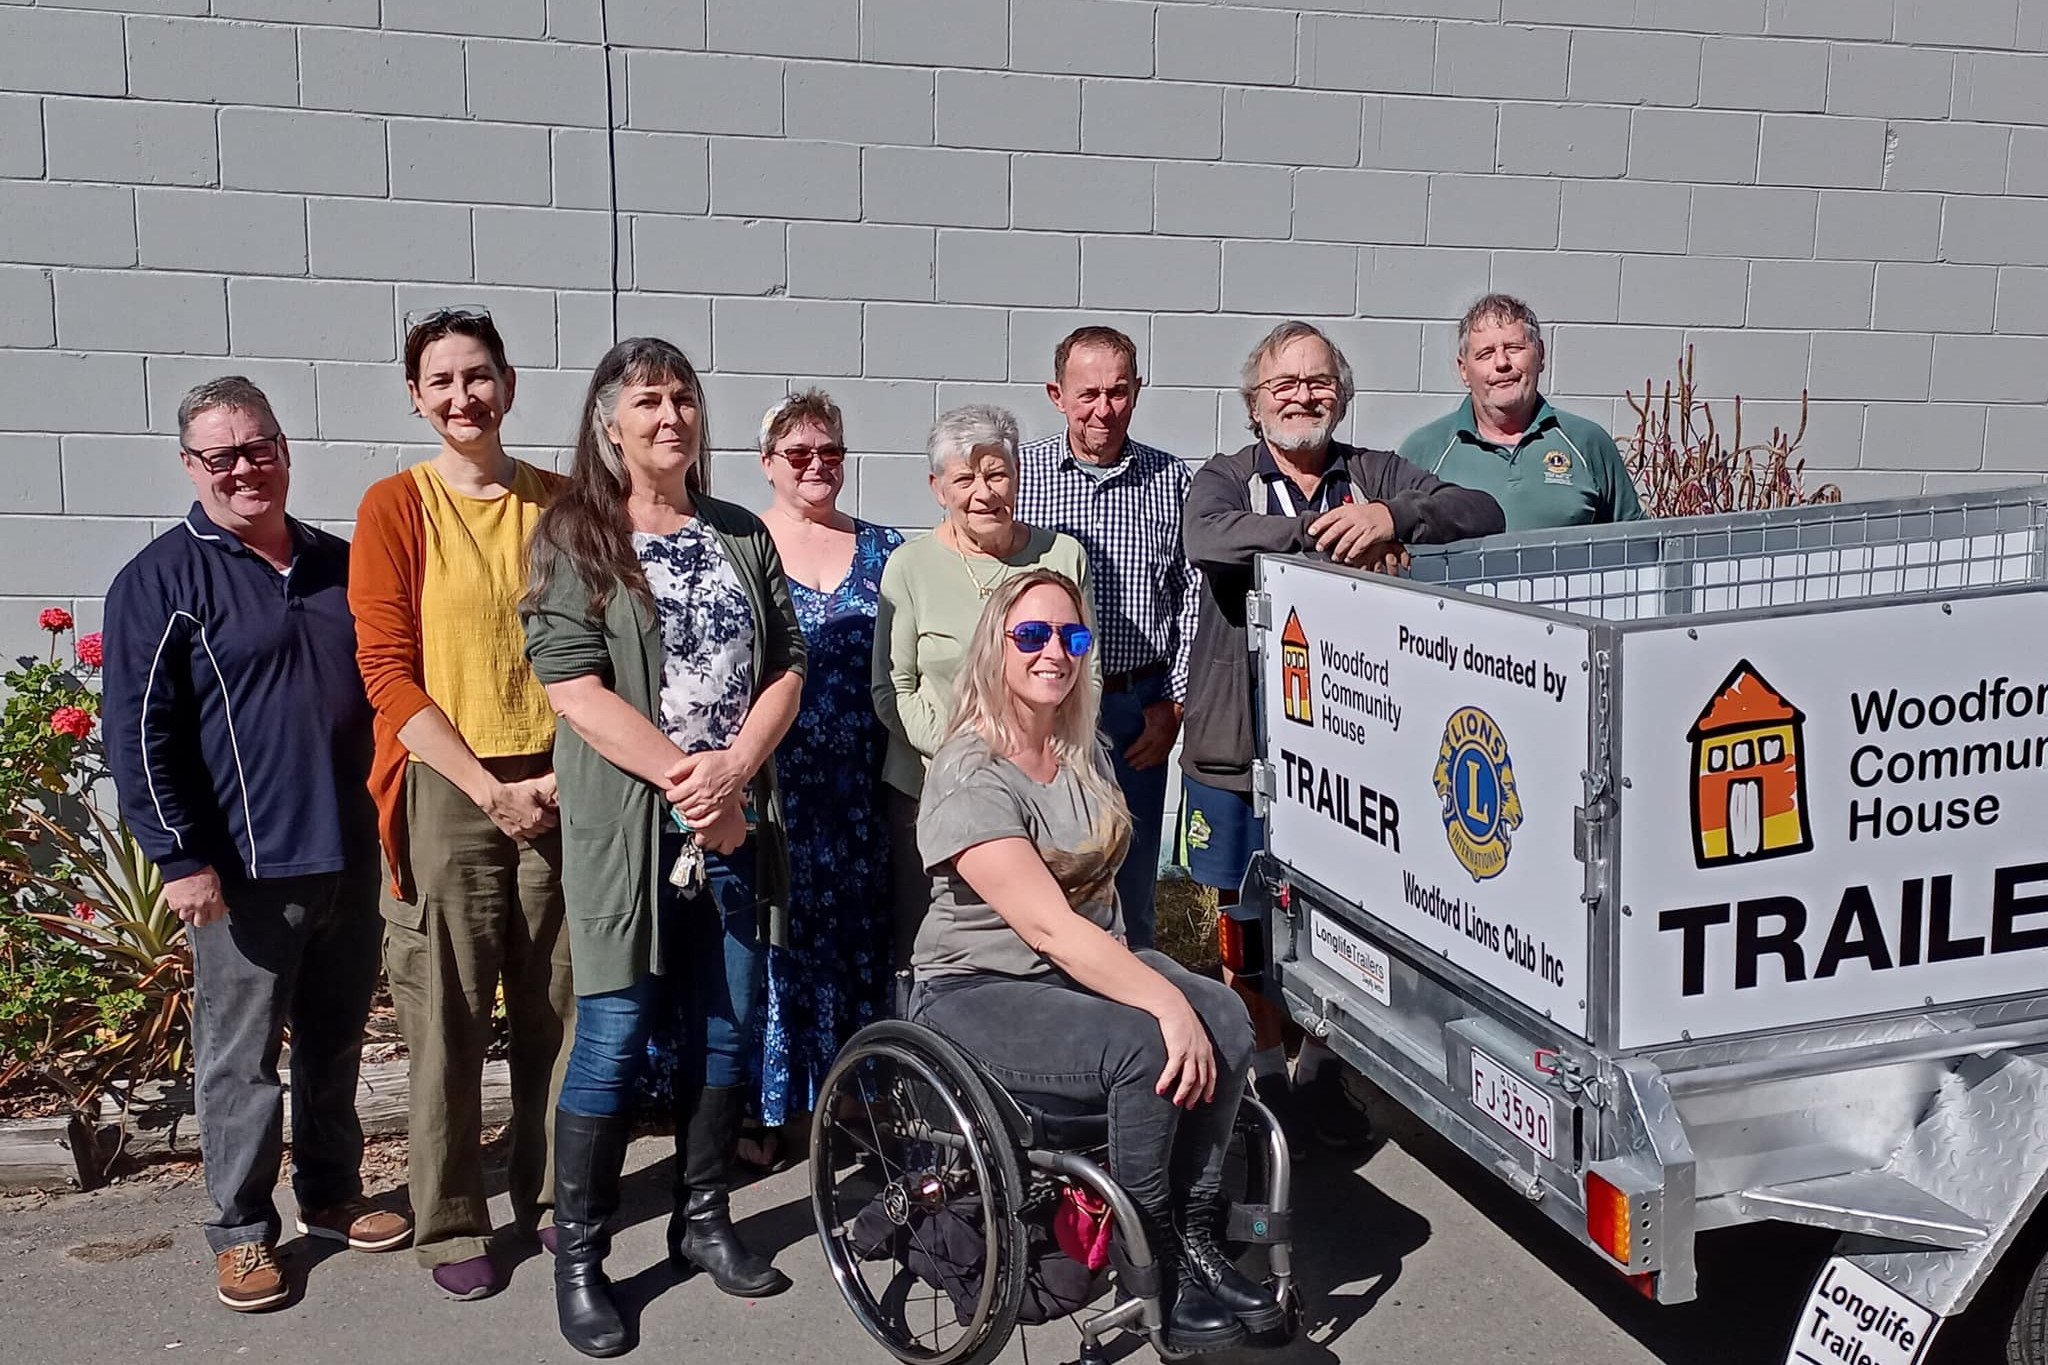 Members of the Woodford Community House and Woodford Lions Club with the new sign written box trailer, donated by the Lions to the Community House.